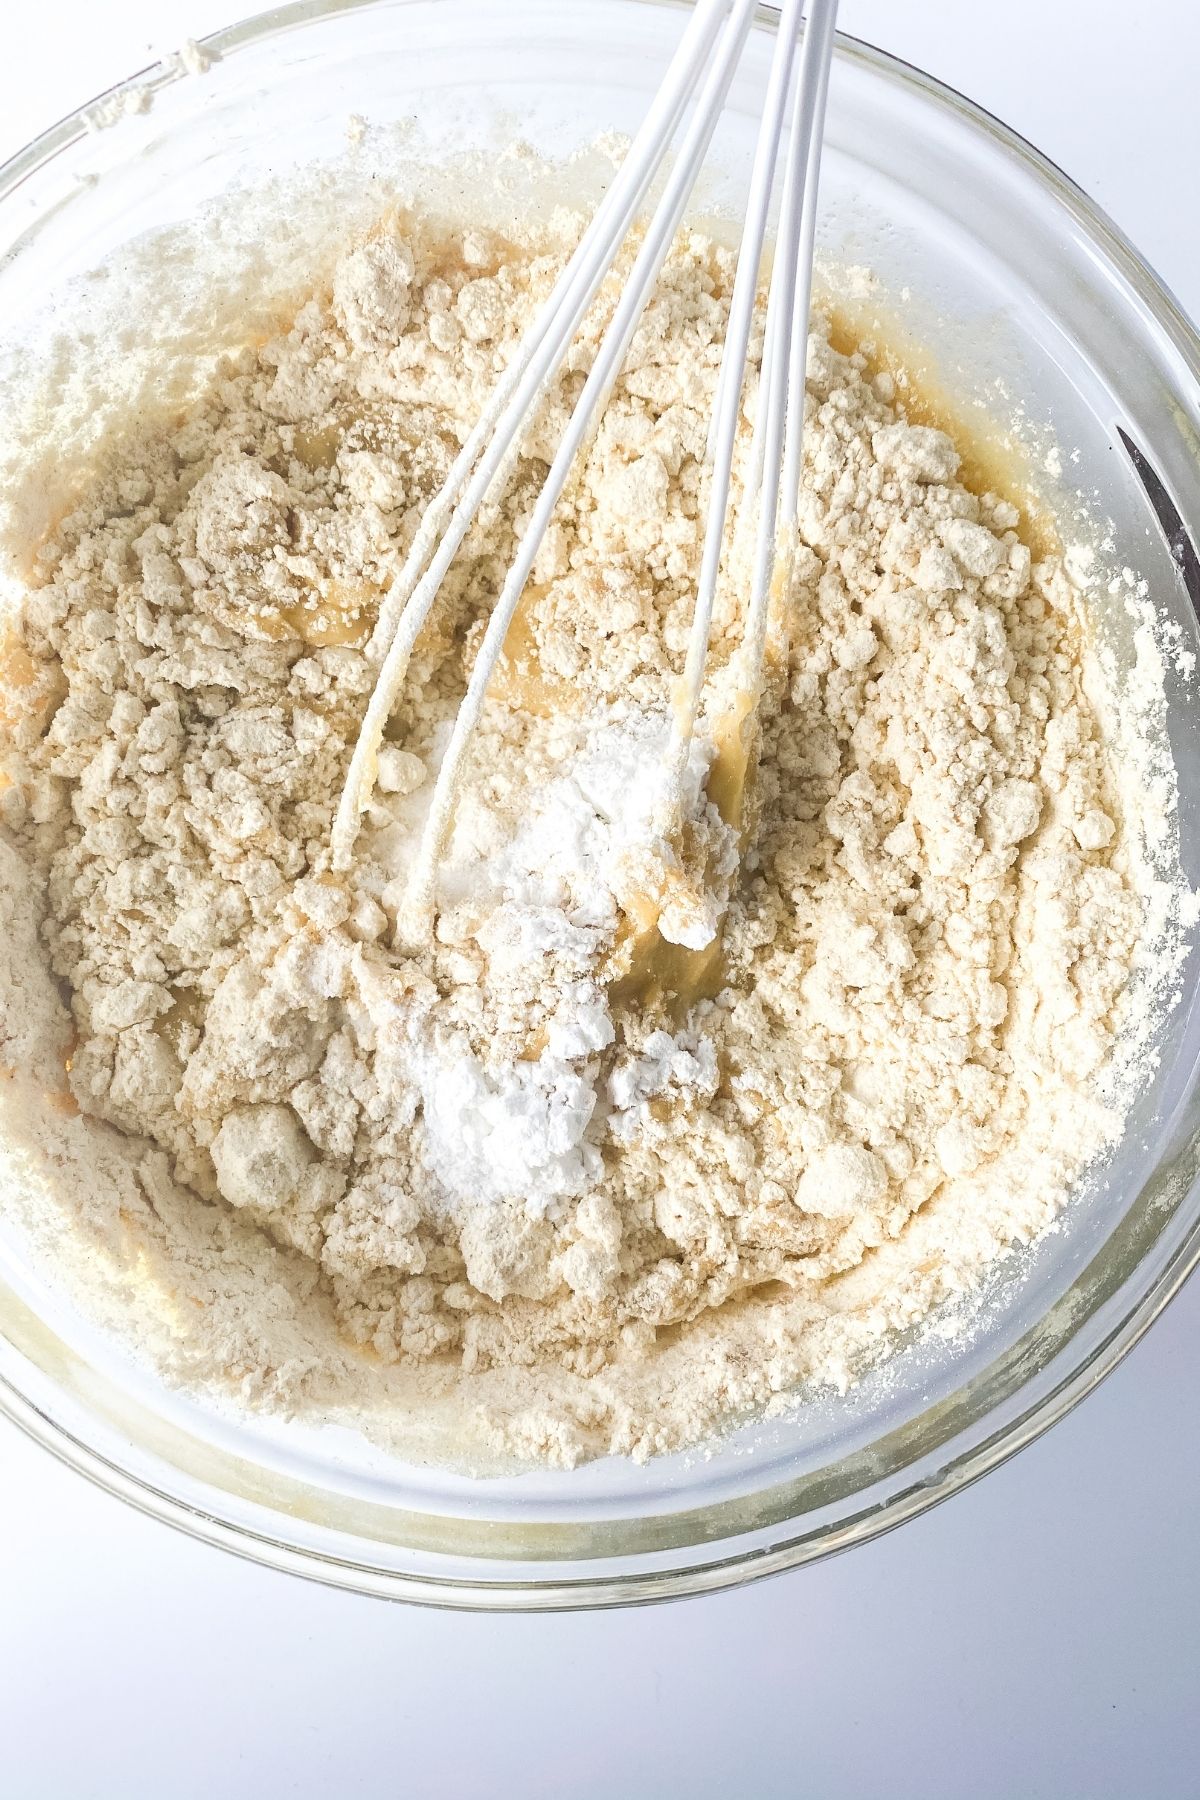 Mixing muffin batter